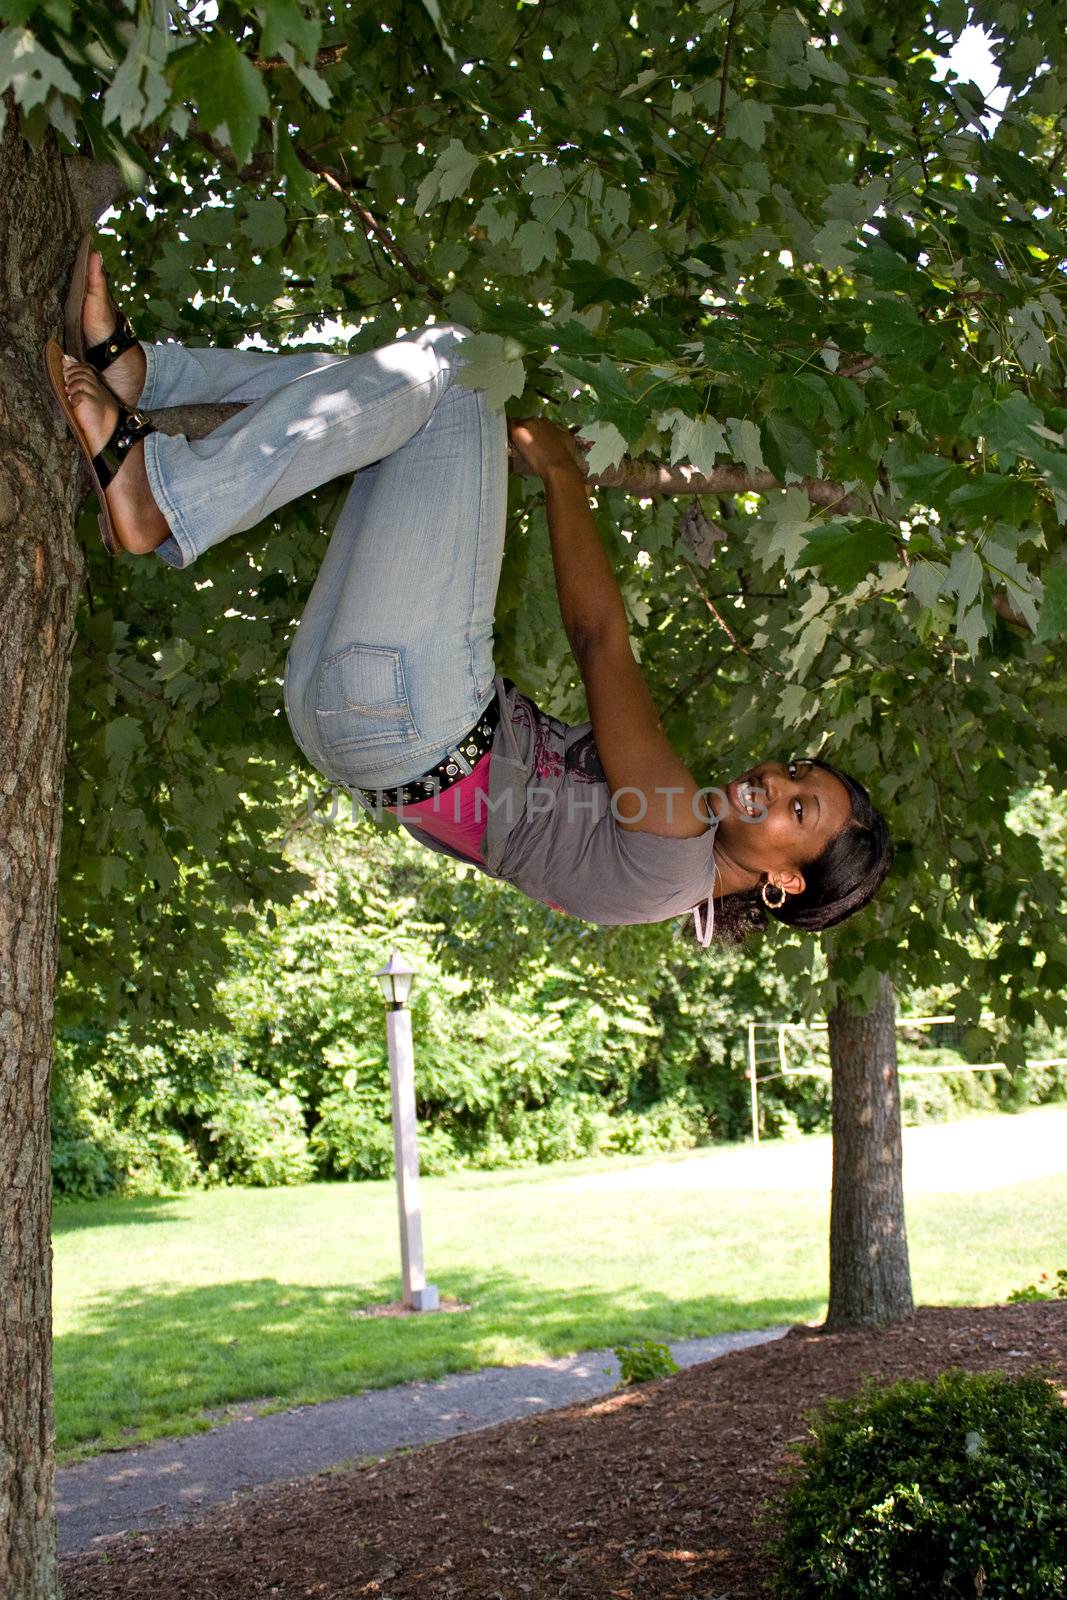 A pretty young woman playfully hangs from a tree limb.